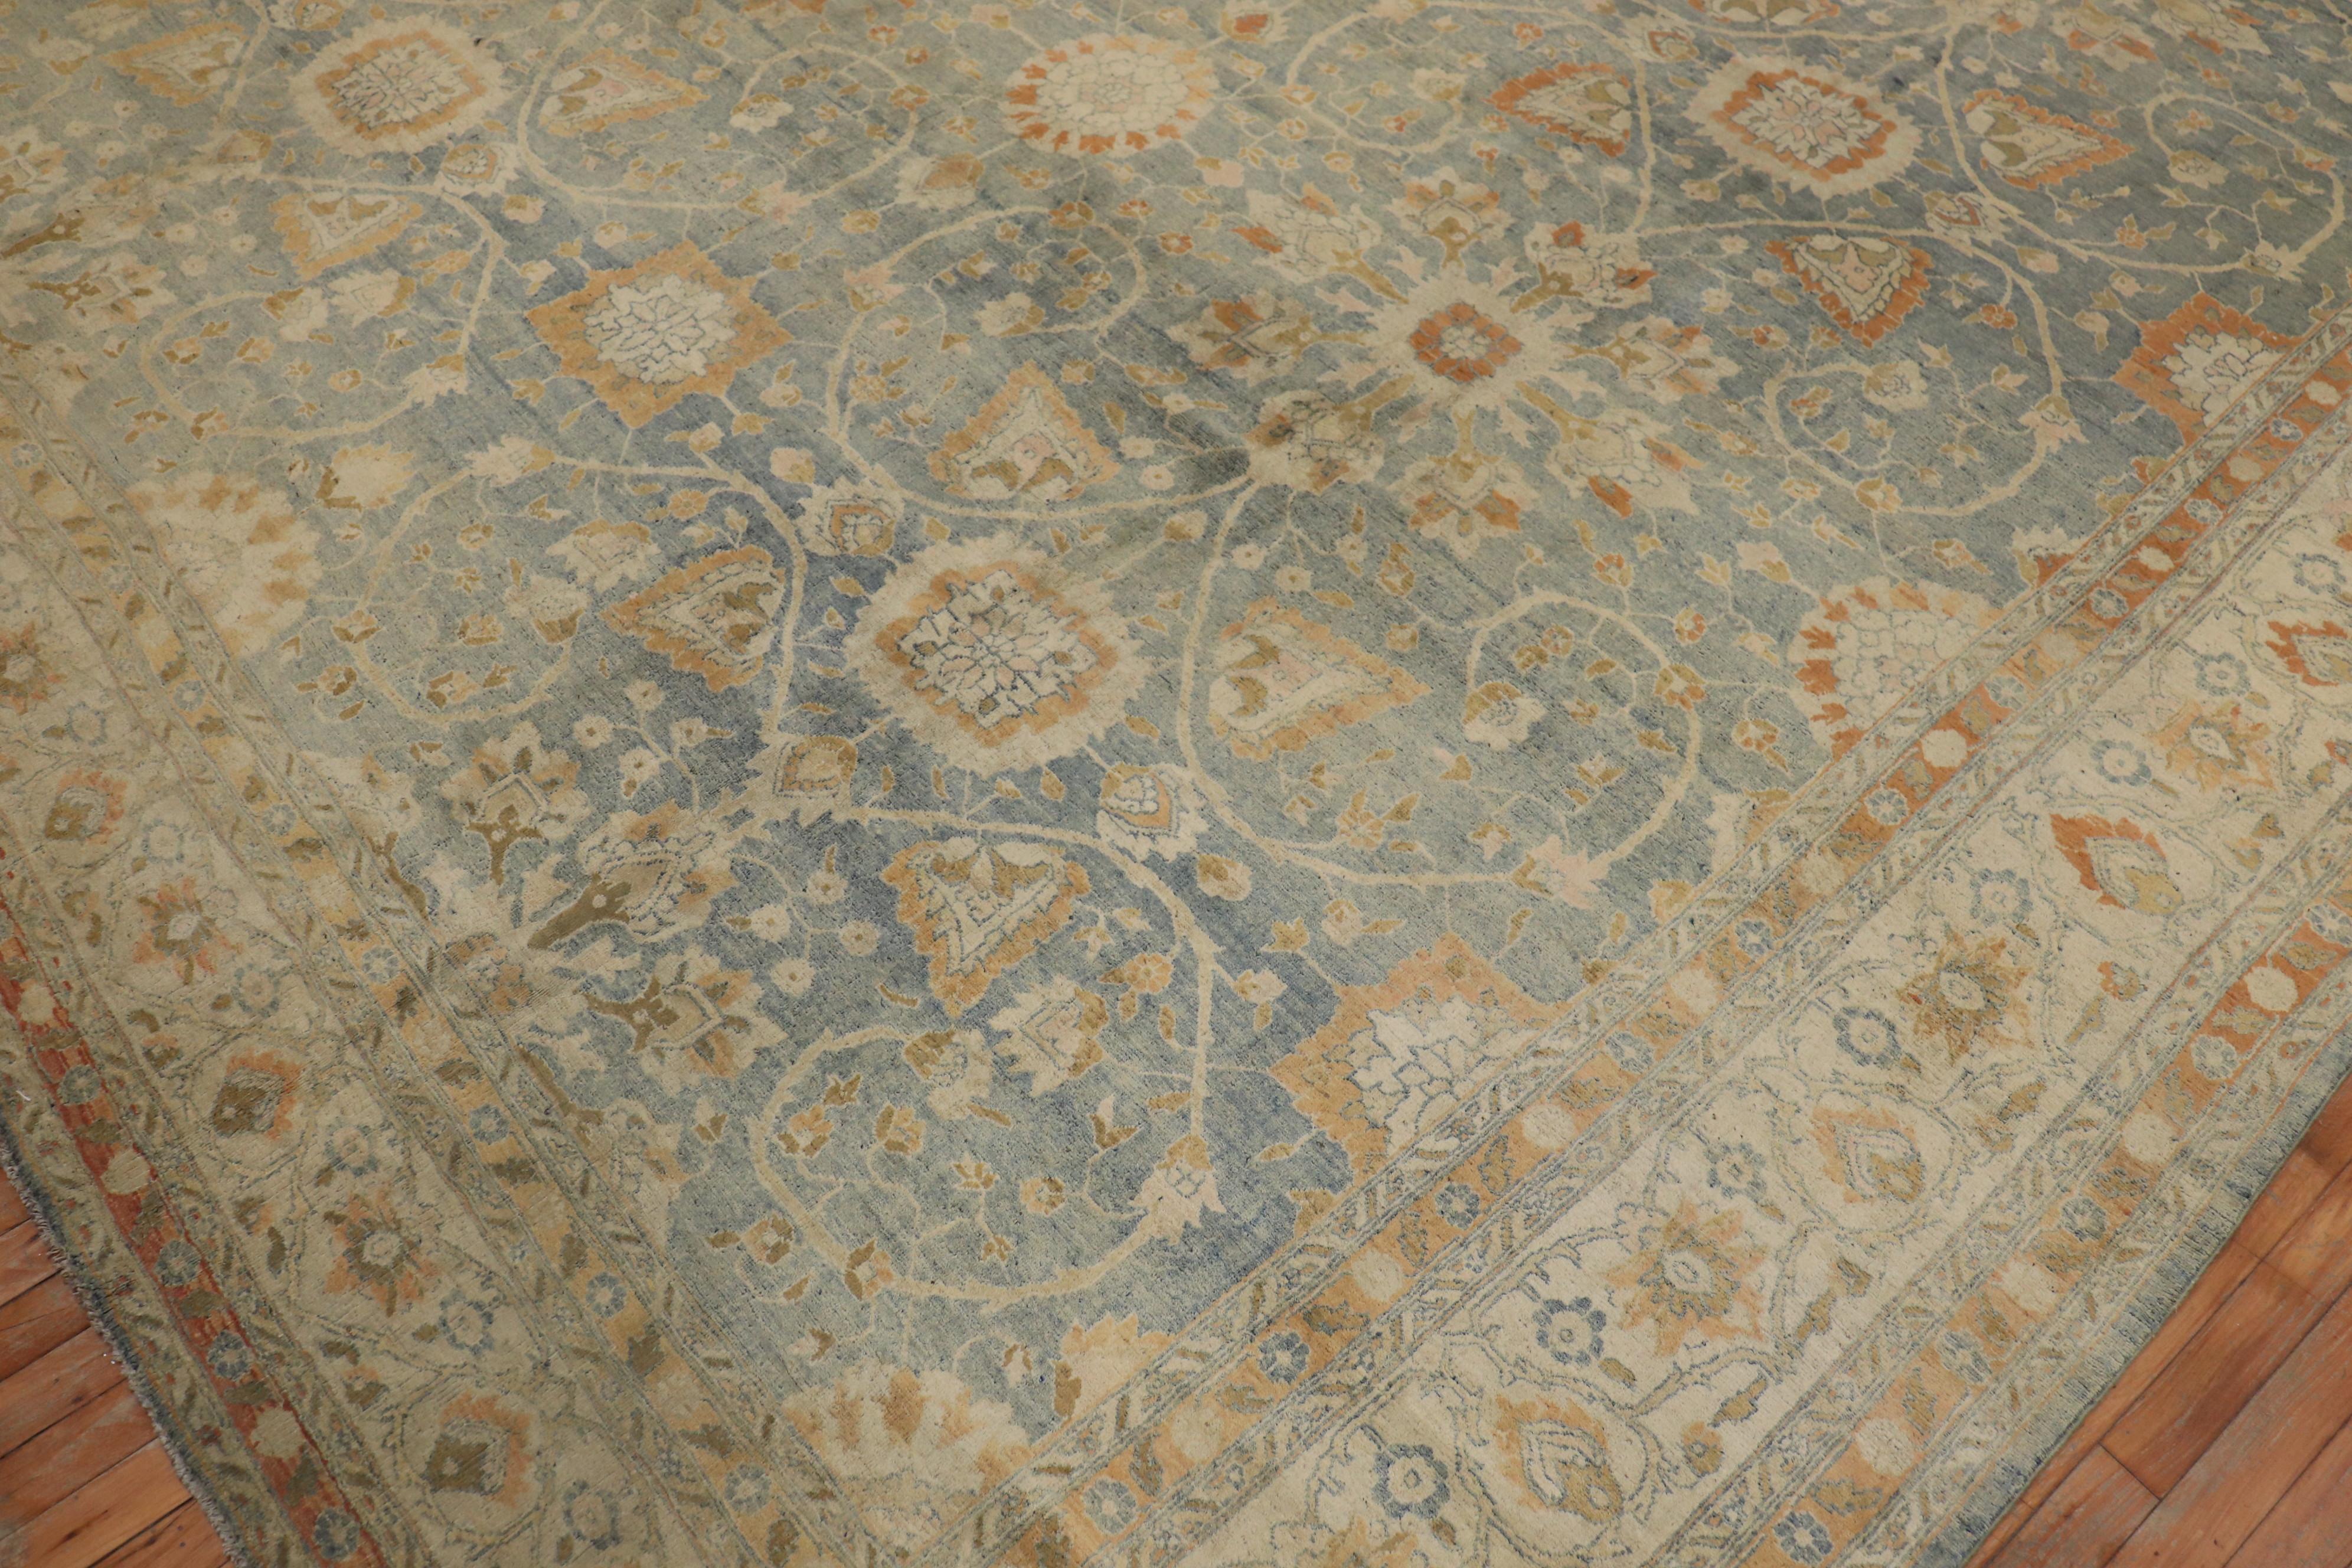 An all-over design traditional Persian Tabriz rug with a light blue field with accents in ivory and peach. The rug has a very soft silk sheen to it and soft on the feet, circa 1920.

Measures: 12'2” x 18'.